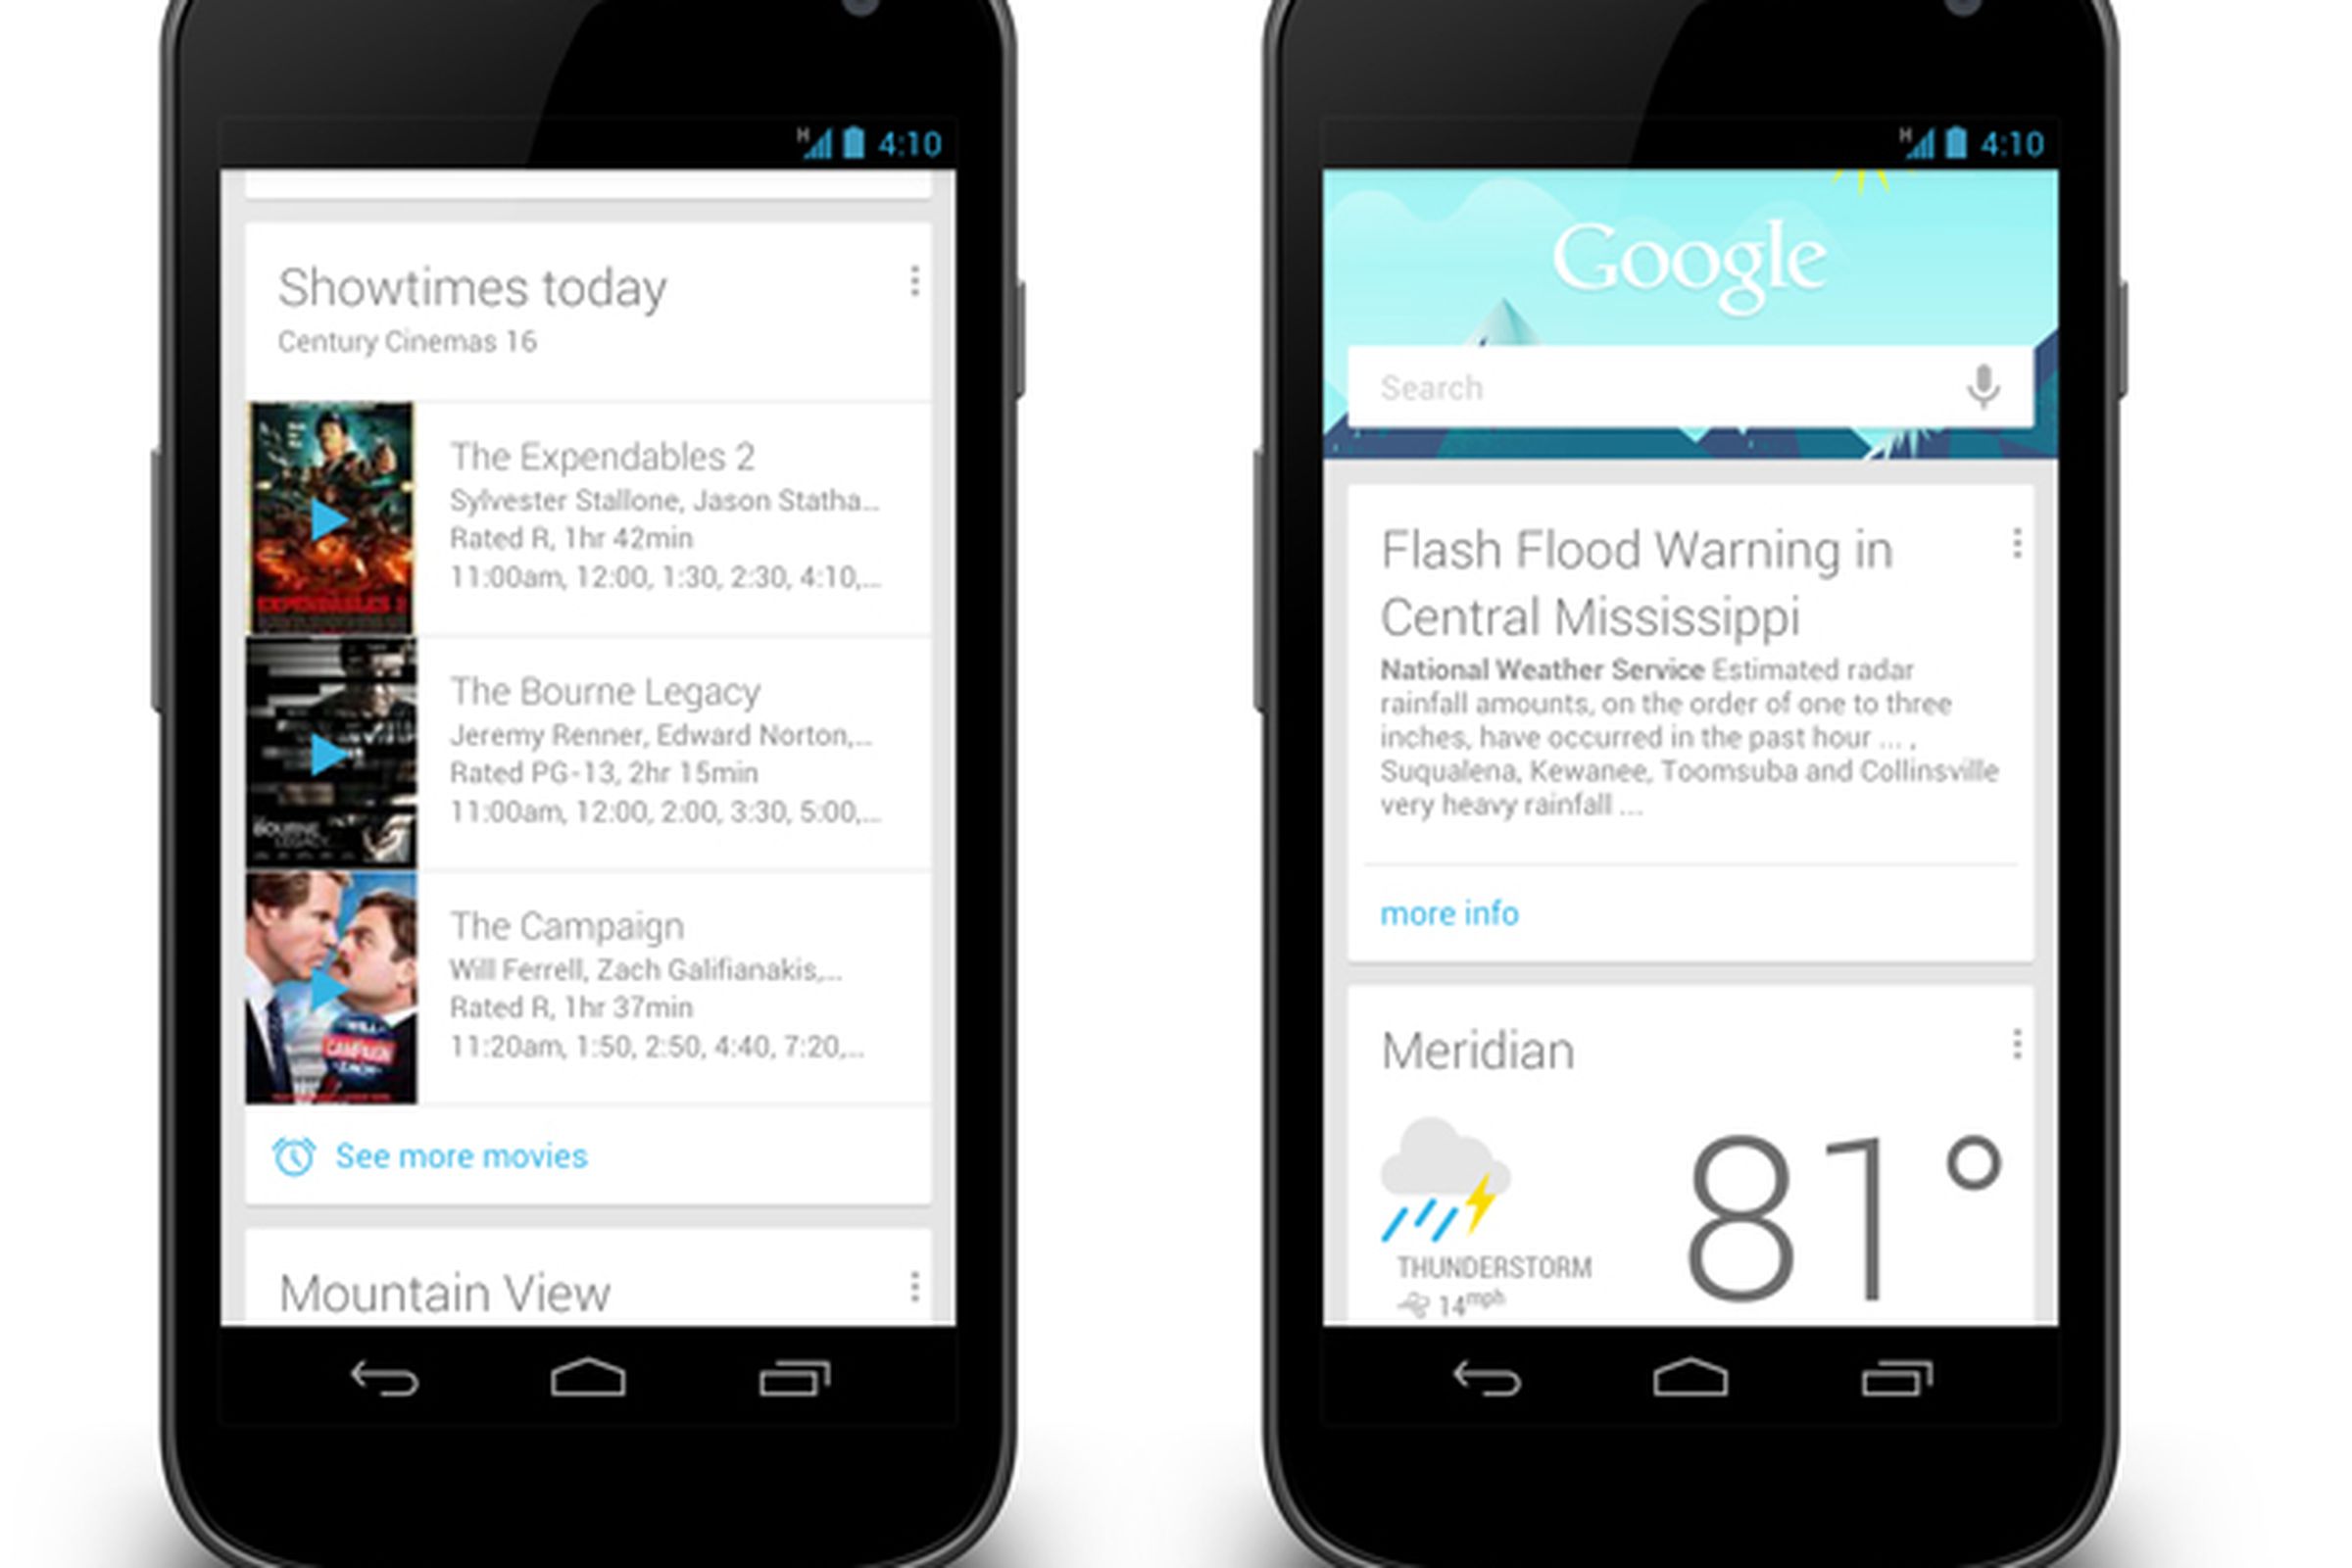 Google Now movie and public alert cards